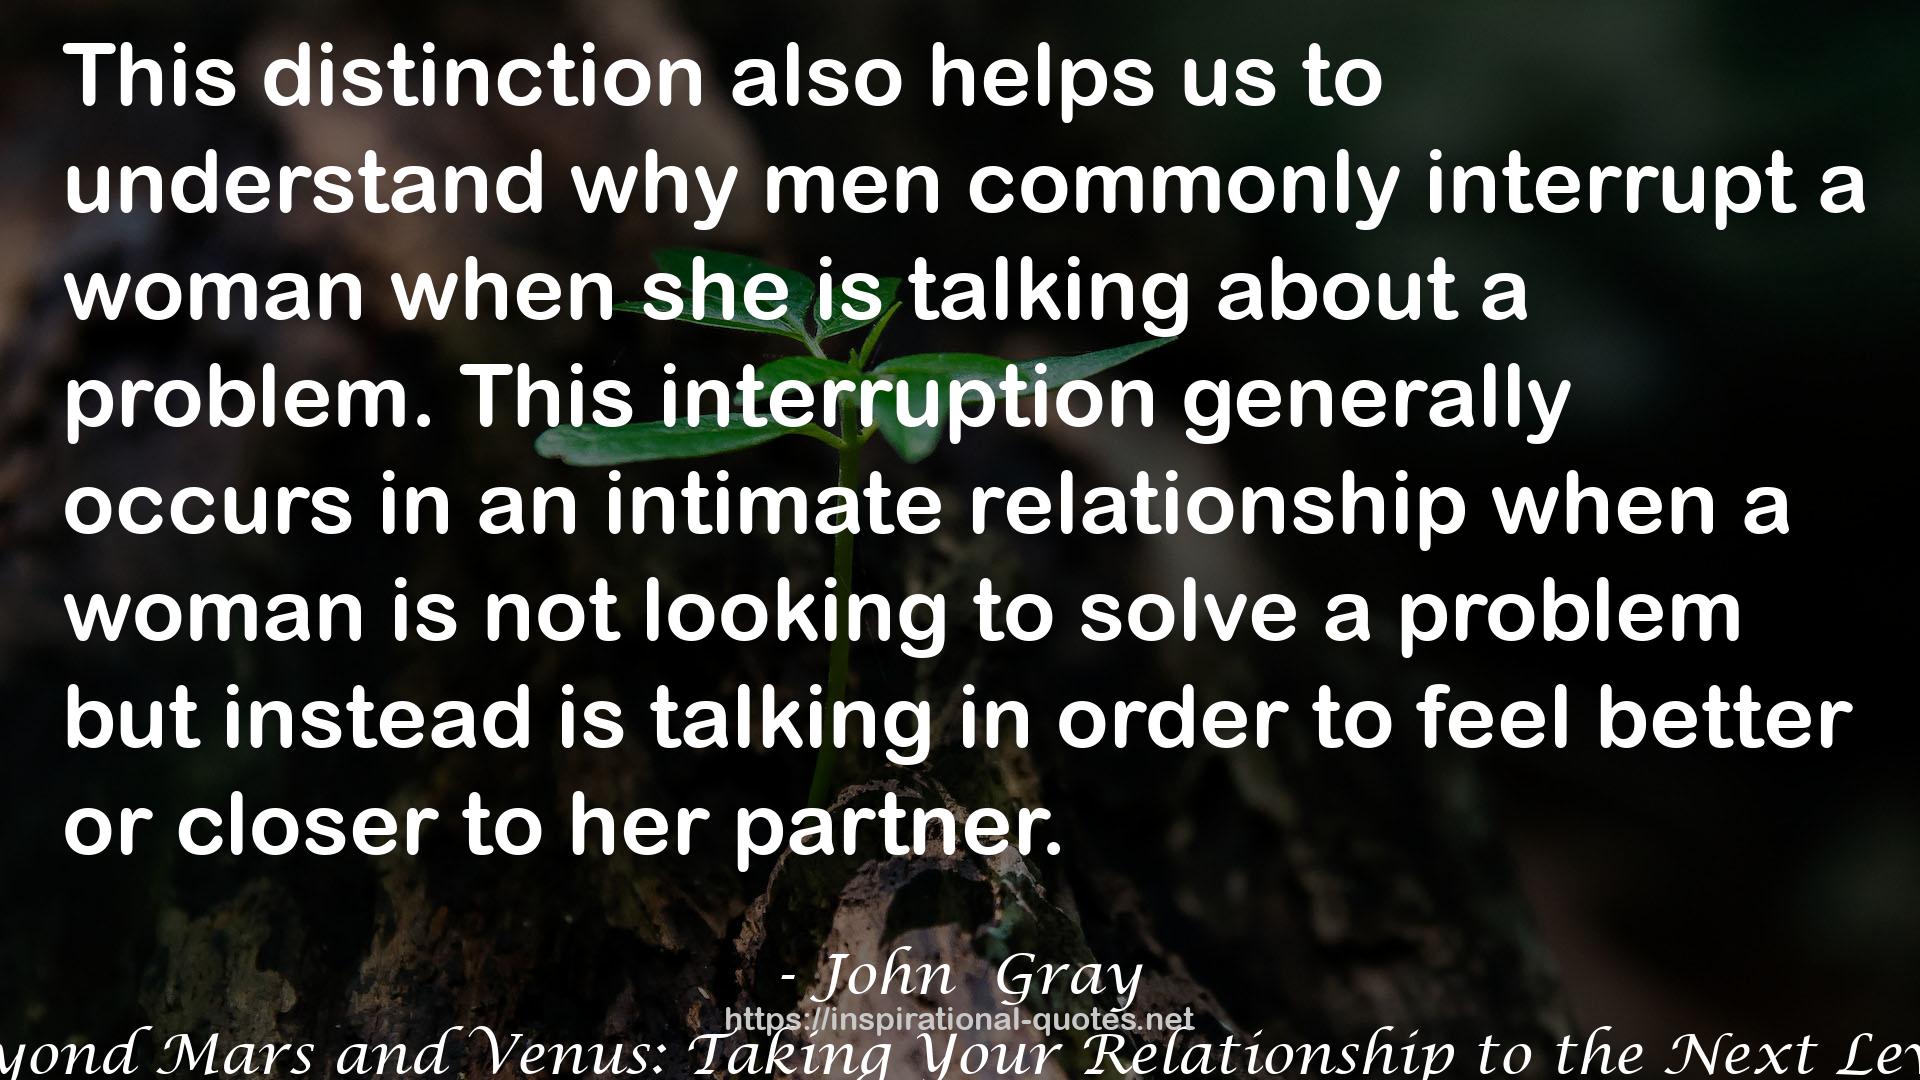 Beyond Mars and Venus: Taking Your Relationship to the Next Level QUOTES